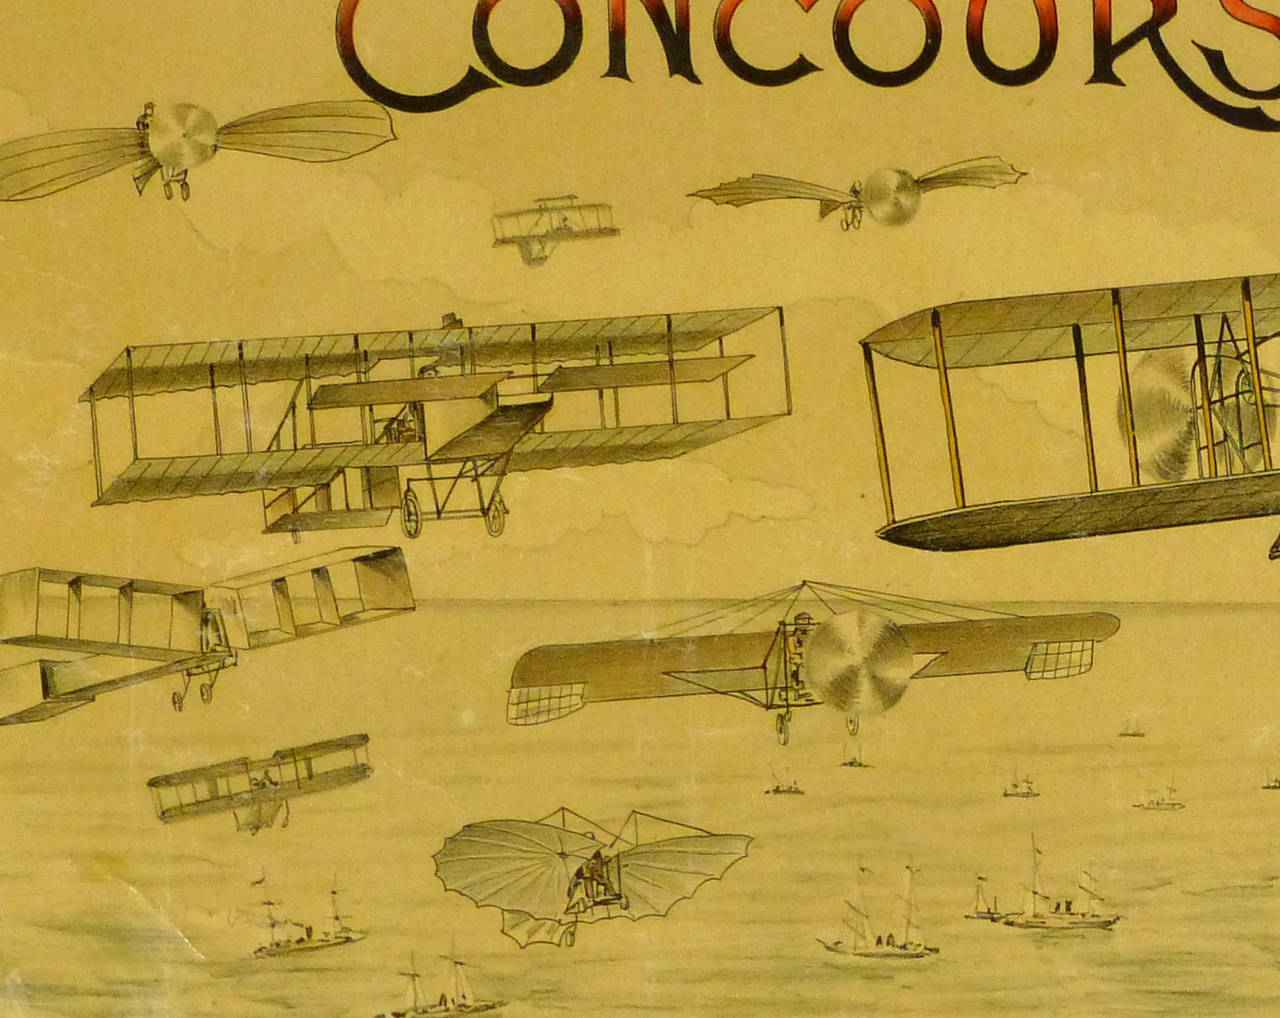 Detailed and whimsical color stone lithograph of an aviation race taking place over Monaco, circa 1900. 

Original vintage artwork on paper displayed on a white mat with a gold border. Mat fits a standard-size frame. Archival plastic sleeve and